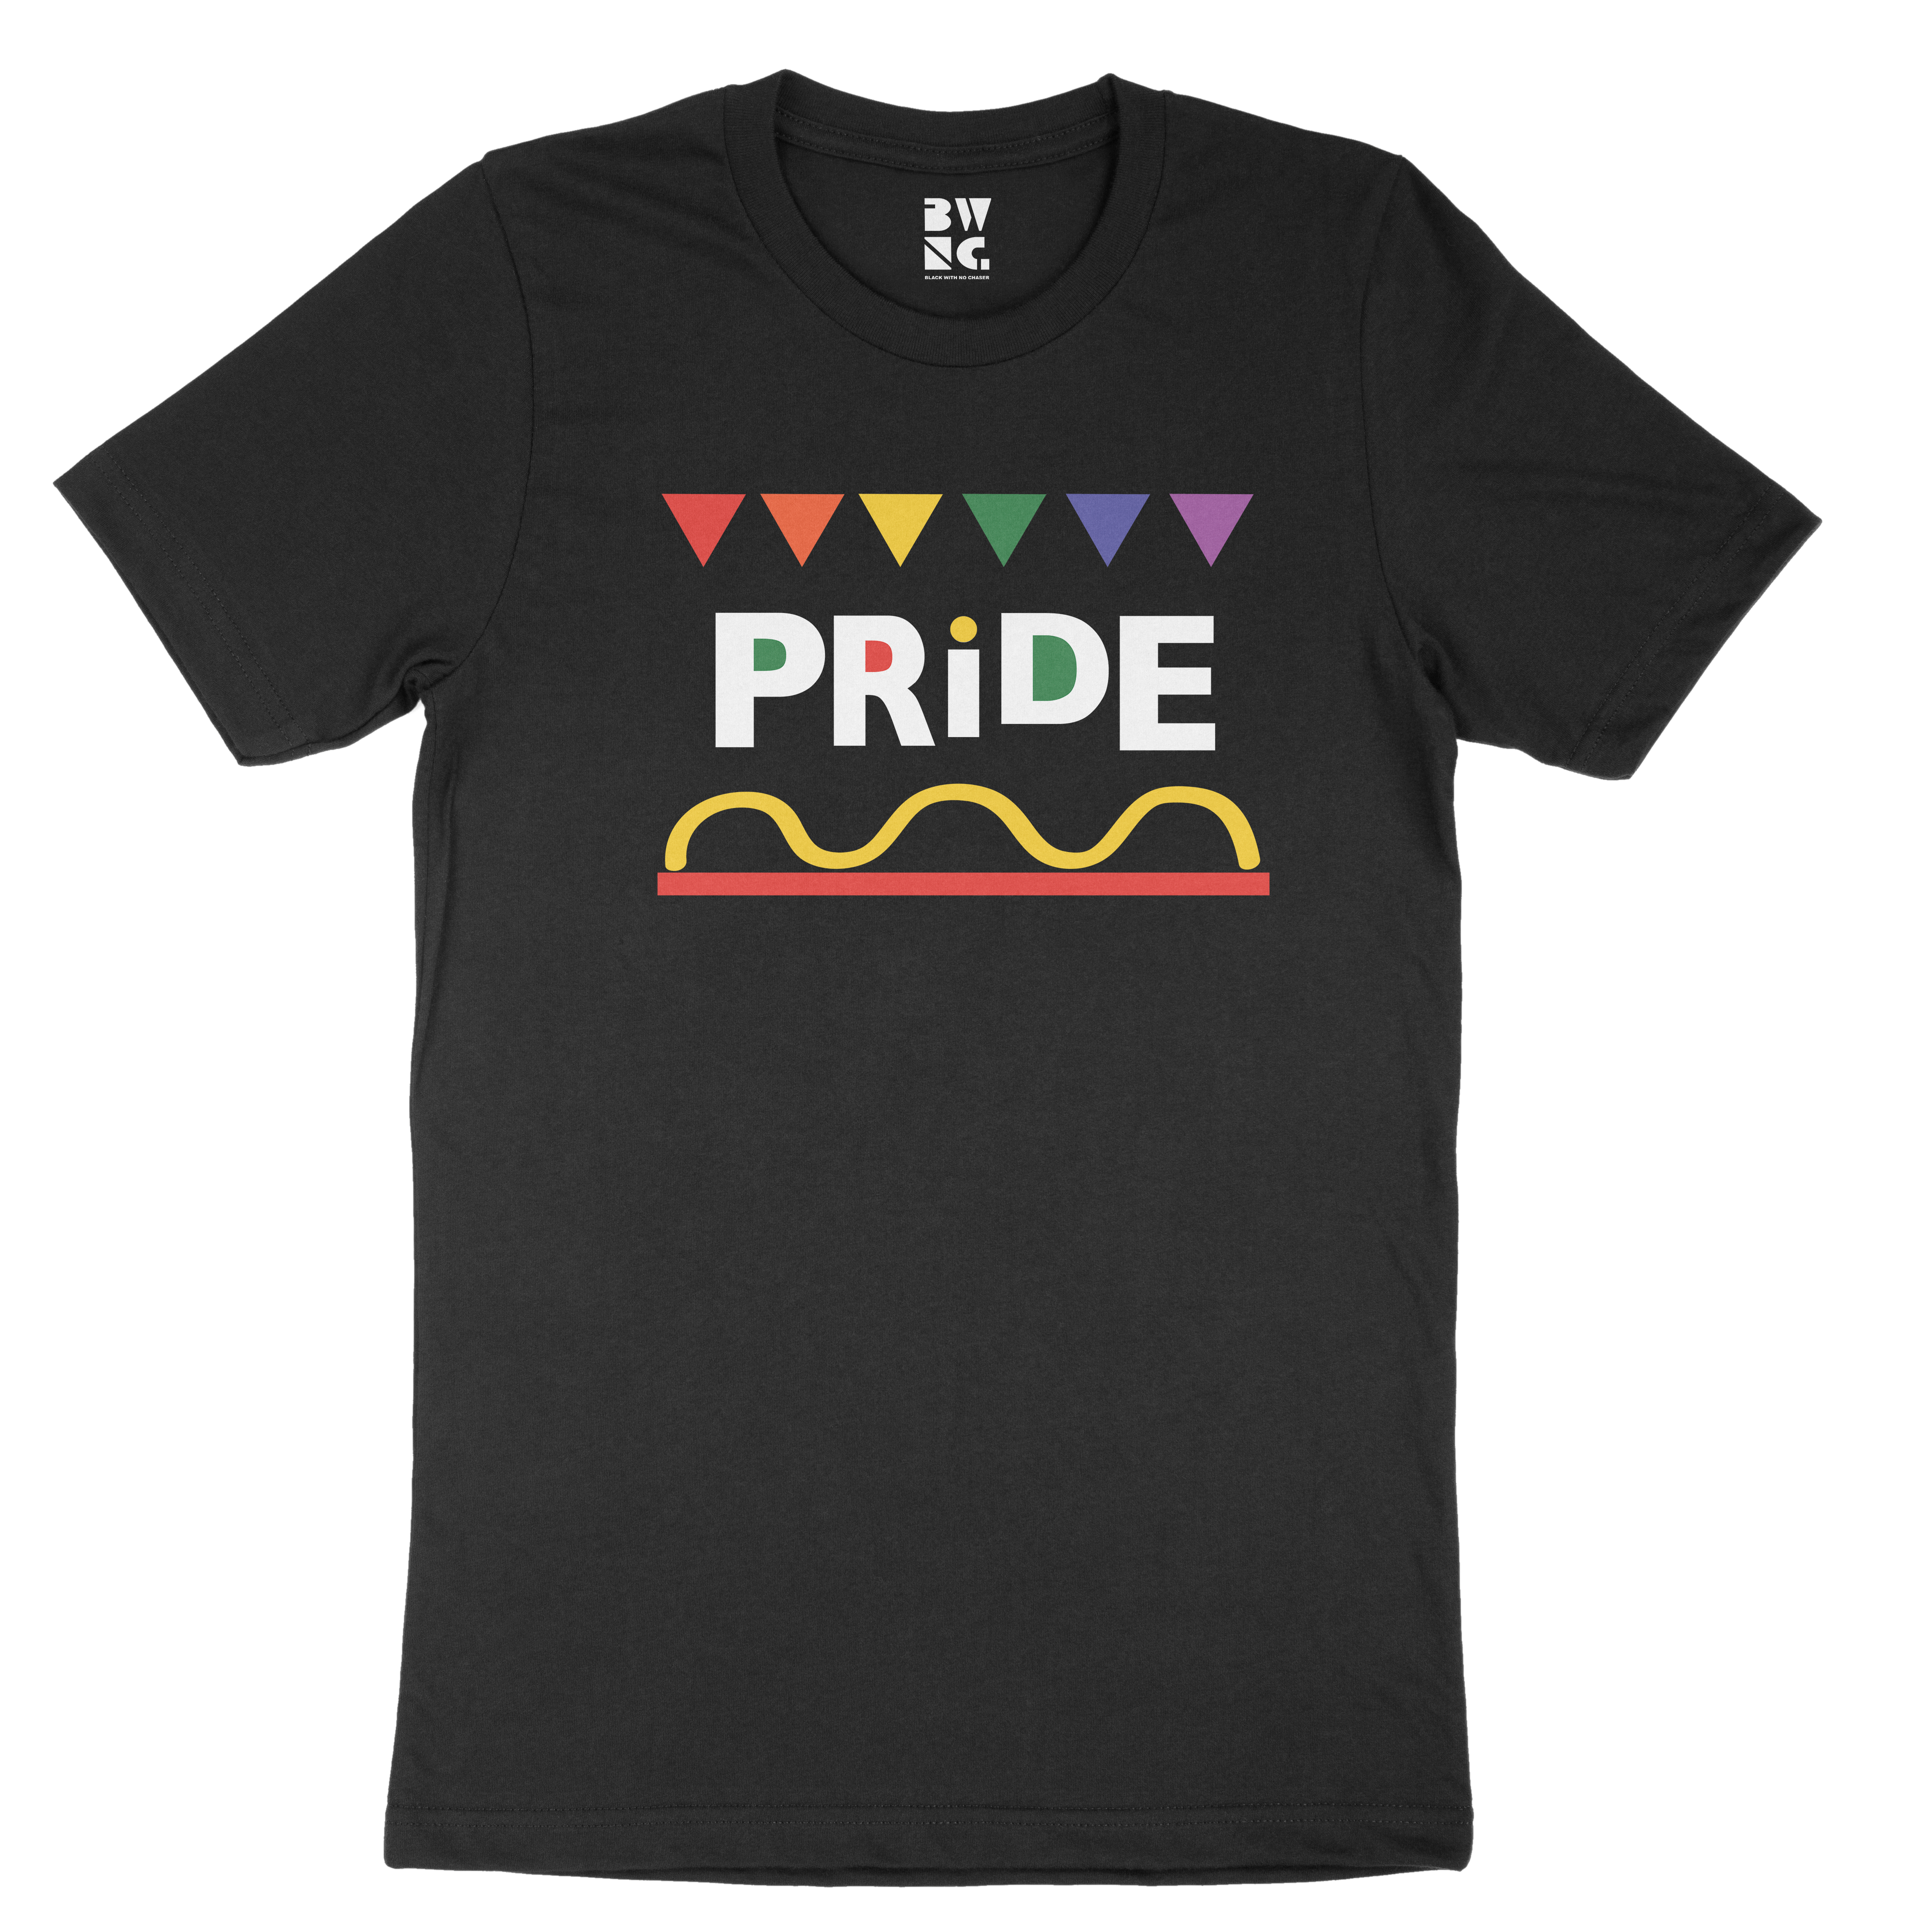 Black With No Chaser PRIDE Short-Sleeve Unisex T-Shirt